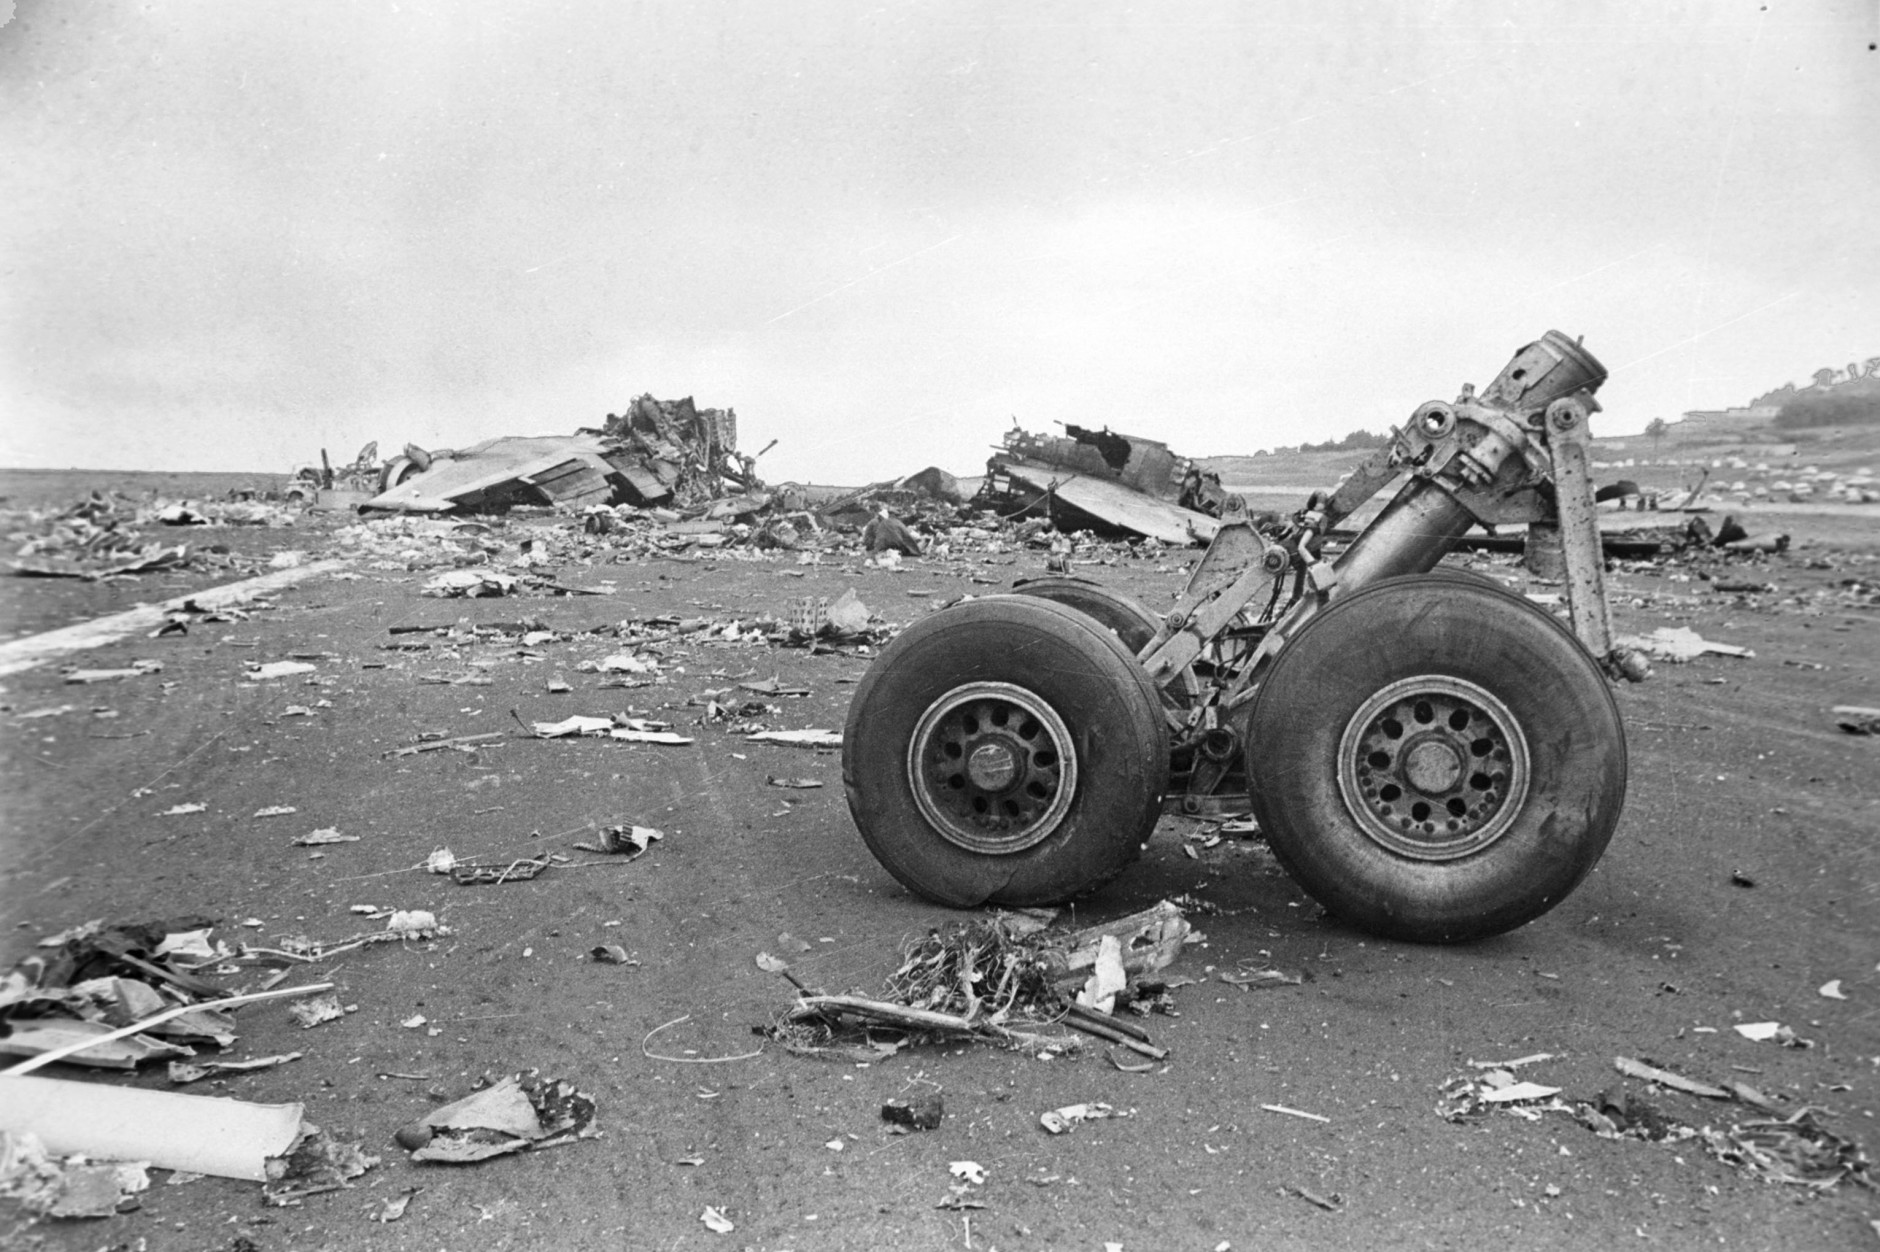 The wreckage of the Pan American World Airways 747 aircraft and KLM Boeing 747 jumbo are scattered over the runway at the airport in Santa Cruz de Tenerife, Canary Islands, Spain, Monday, March 28, 1977.  The collision between the two planes killed 583 people on board.  (AP Photo)